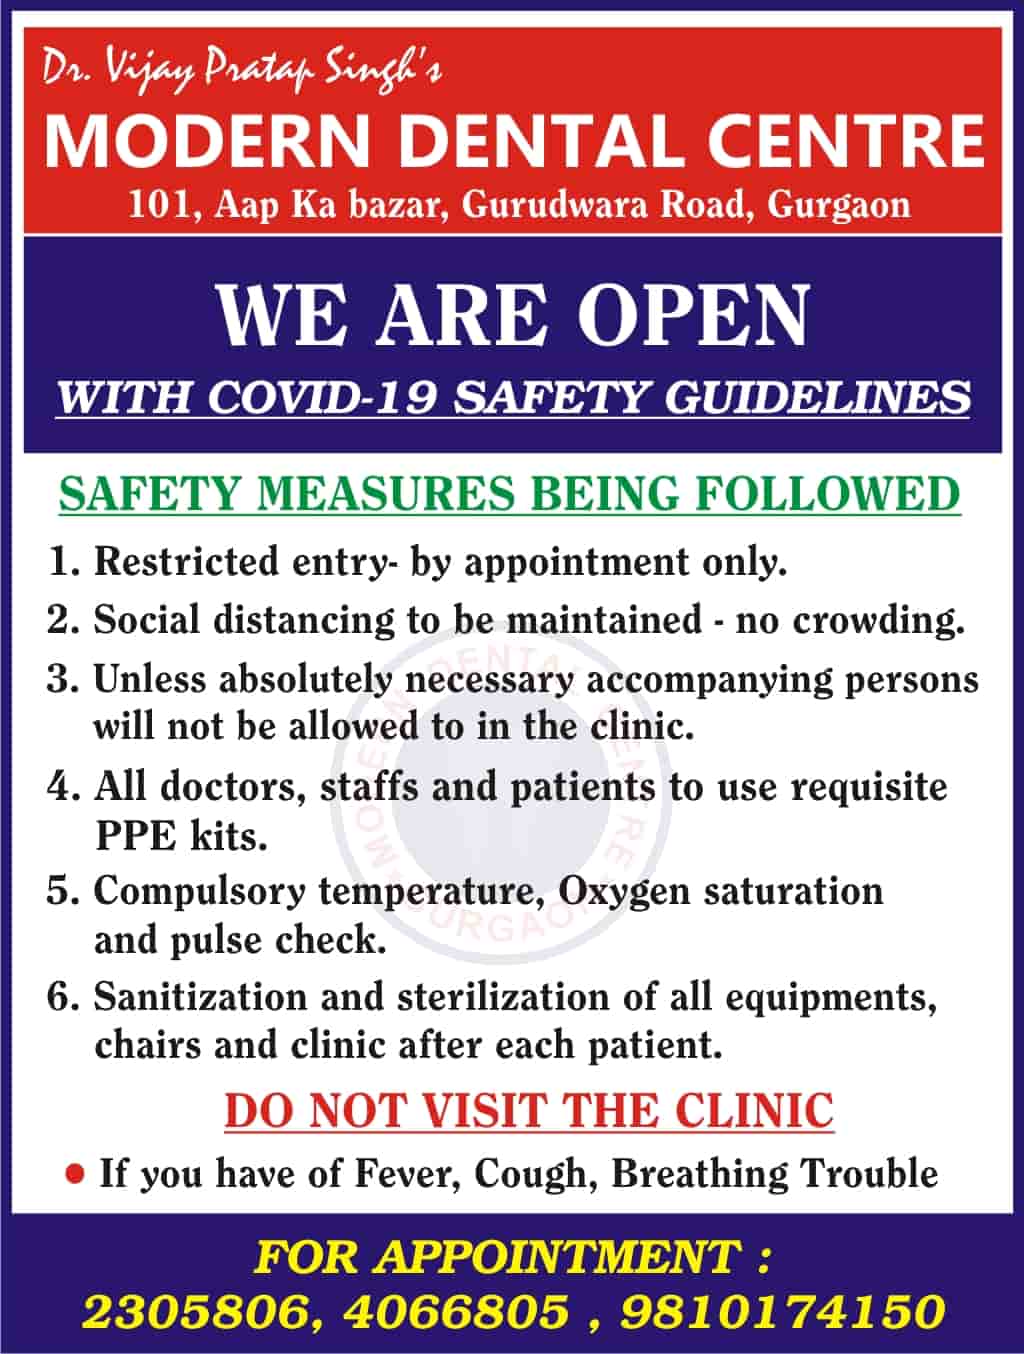 Modern Dental Centre is now open with All Covid-19- Safety Guidelines